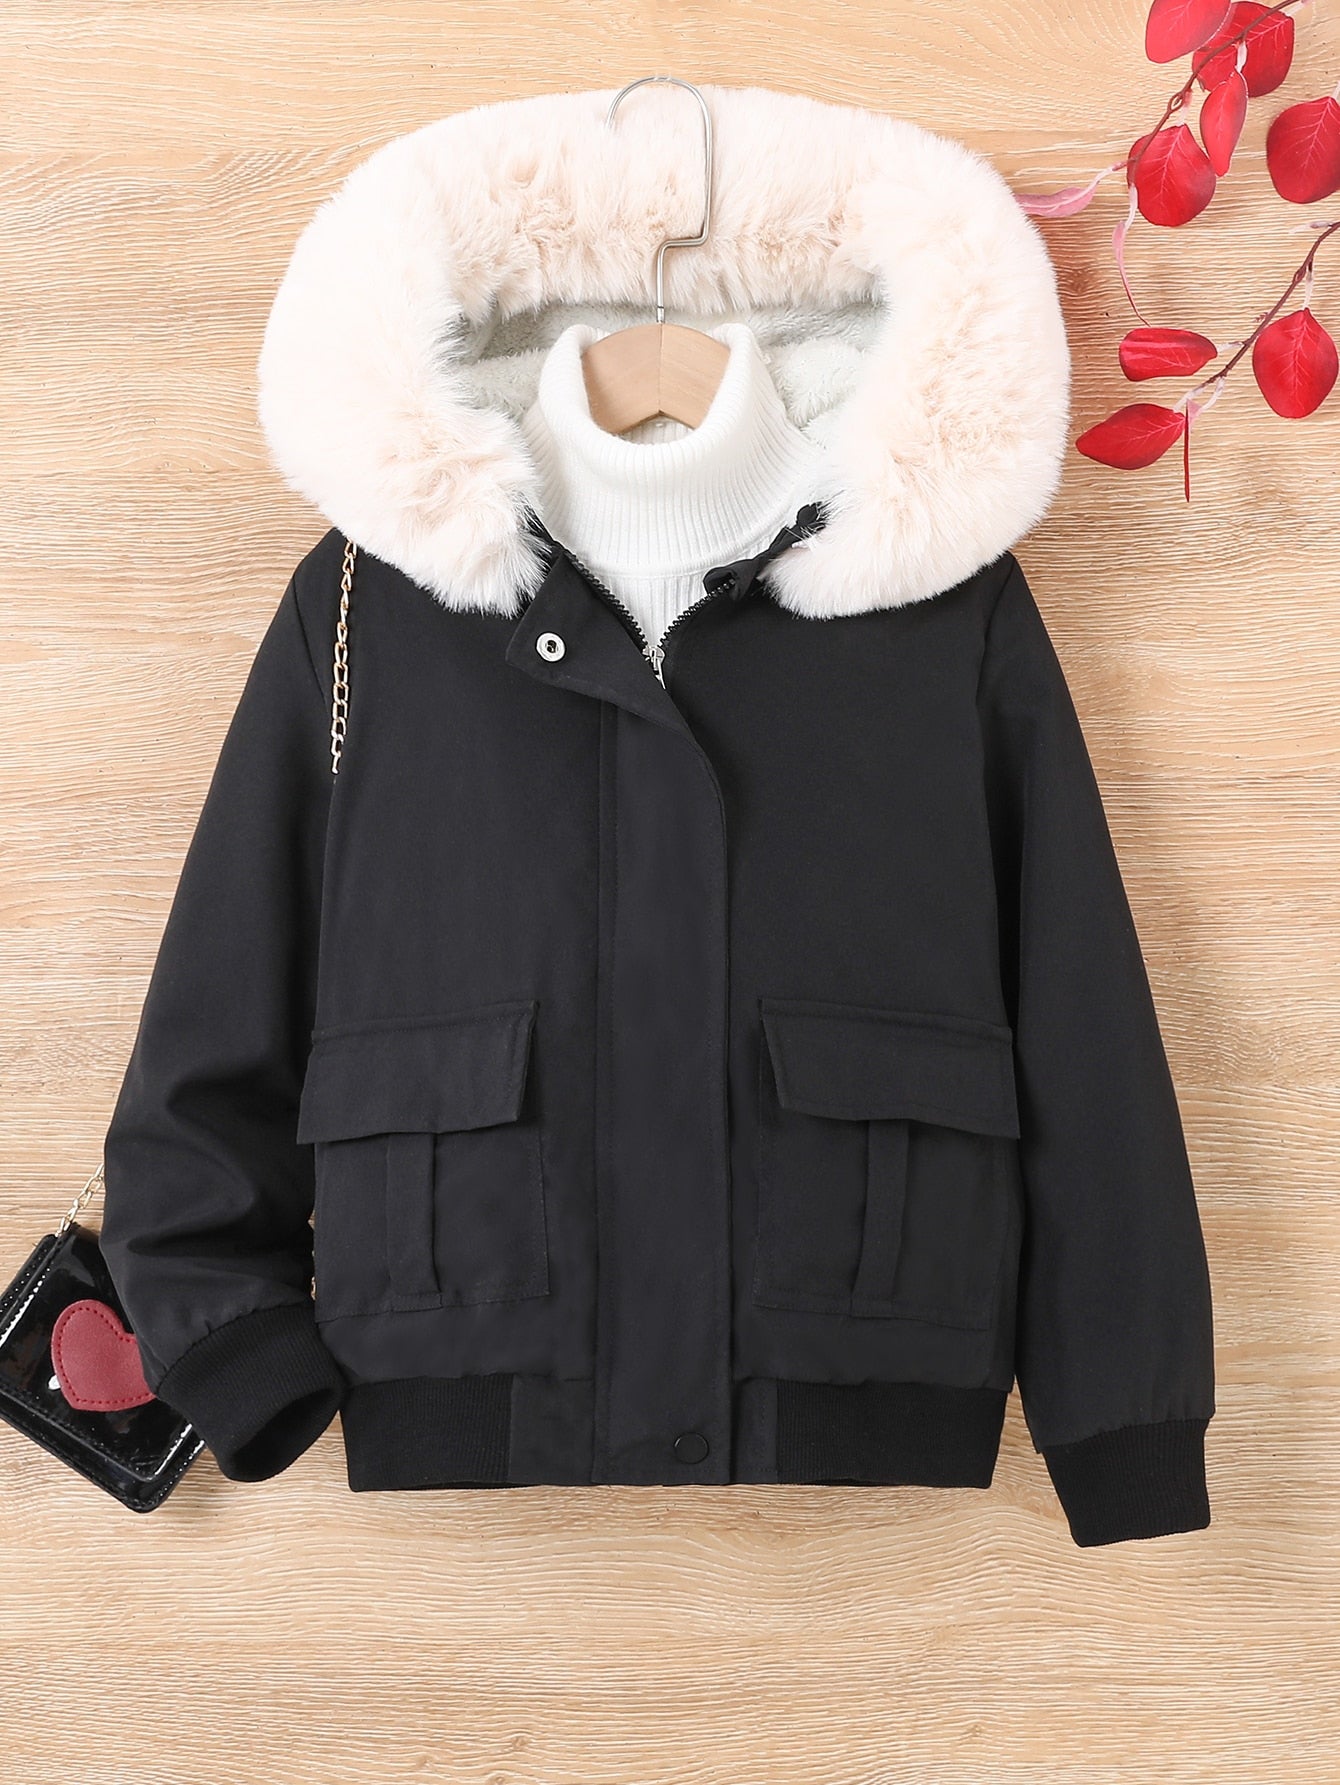 Girls Teddy Lined Fuzzy Trim Hooded Jacket Without Sweater